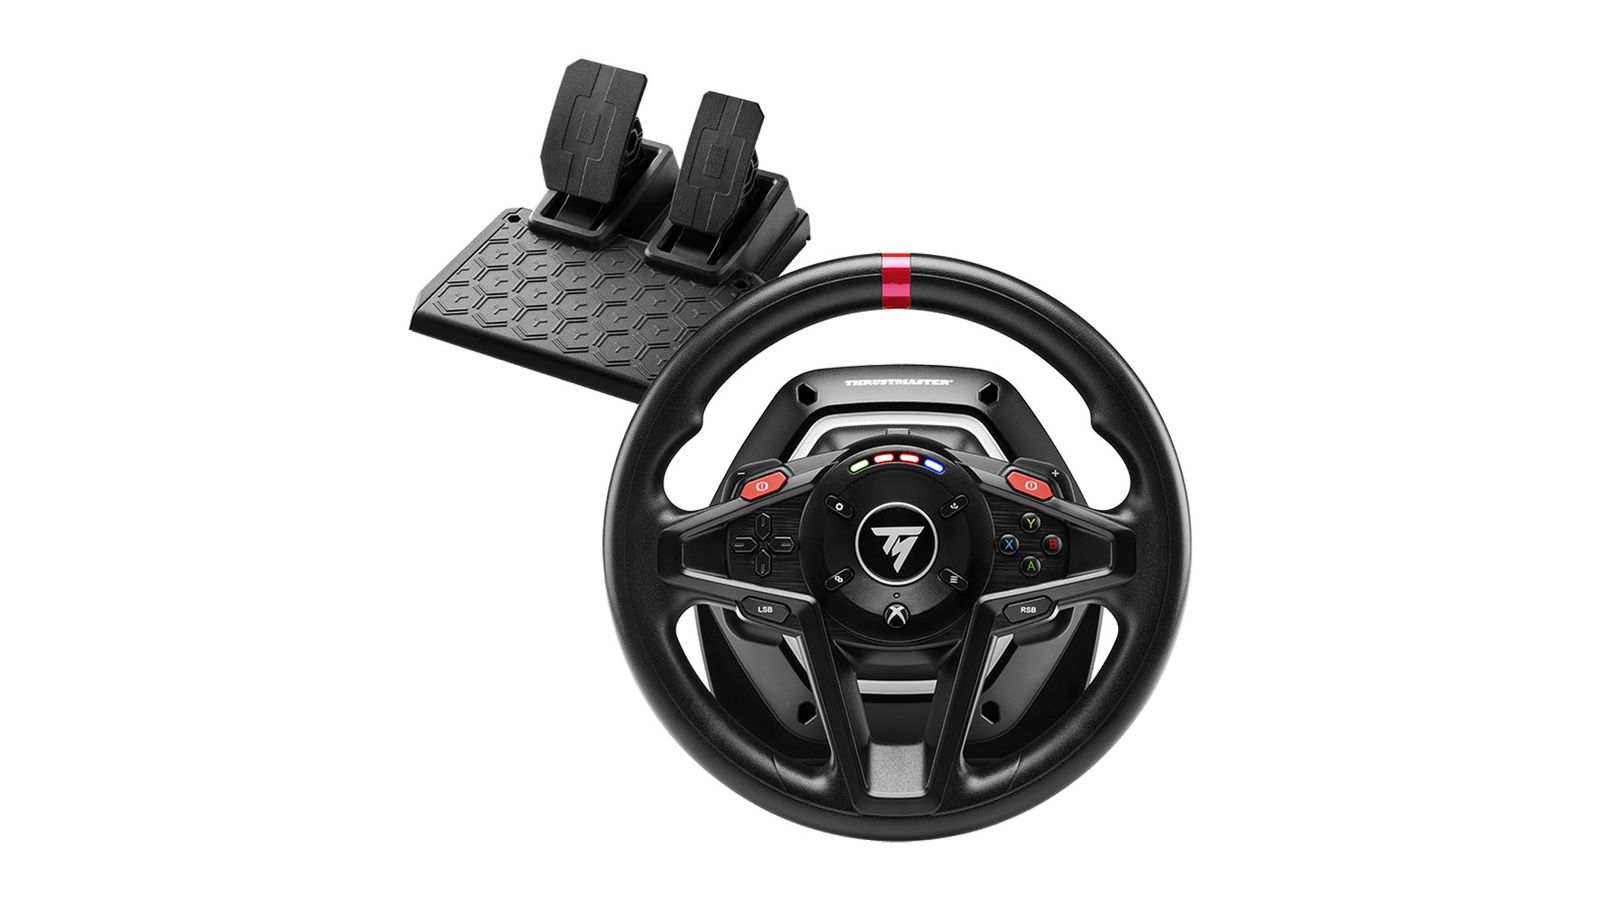 Thrustmaster T128 P / X product image of a black and red racing wheel.